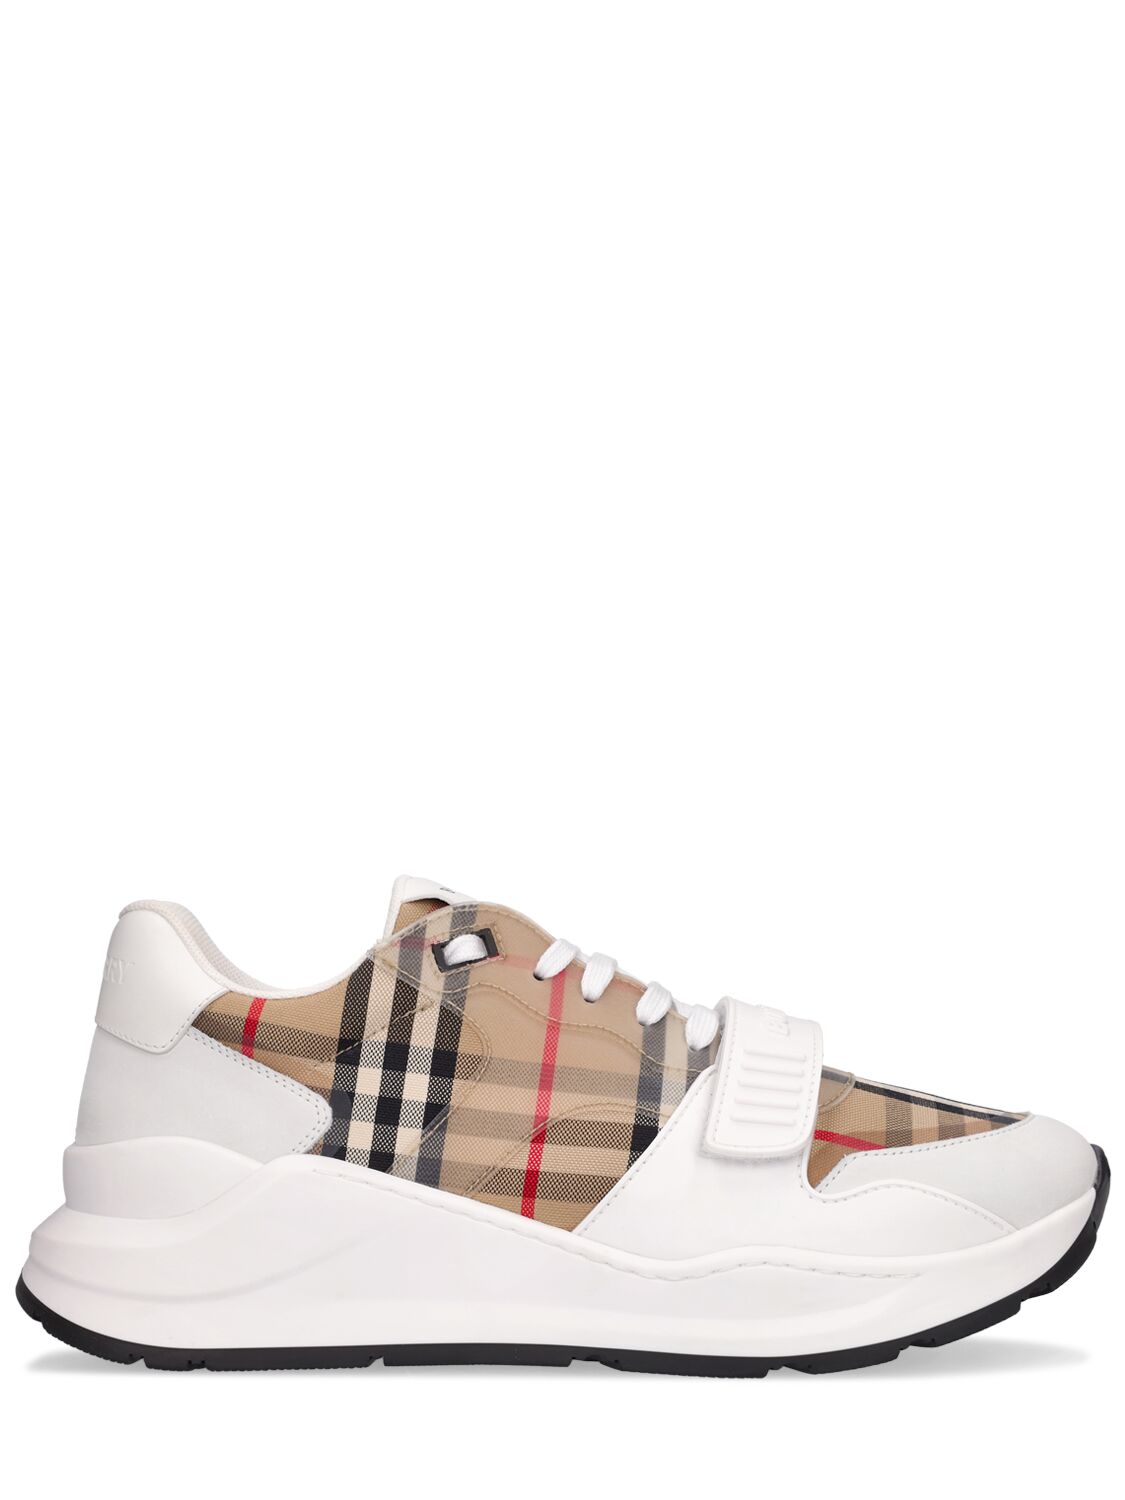 Burberry Ramsey Low Top Sneakers In White,clear